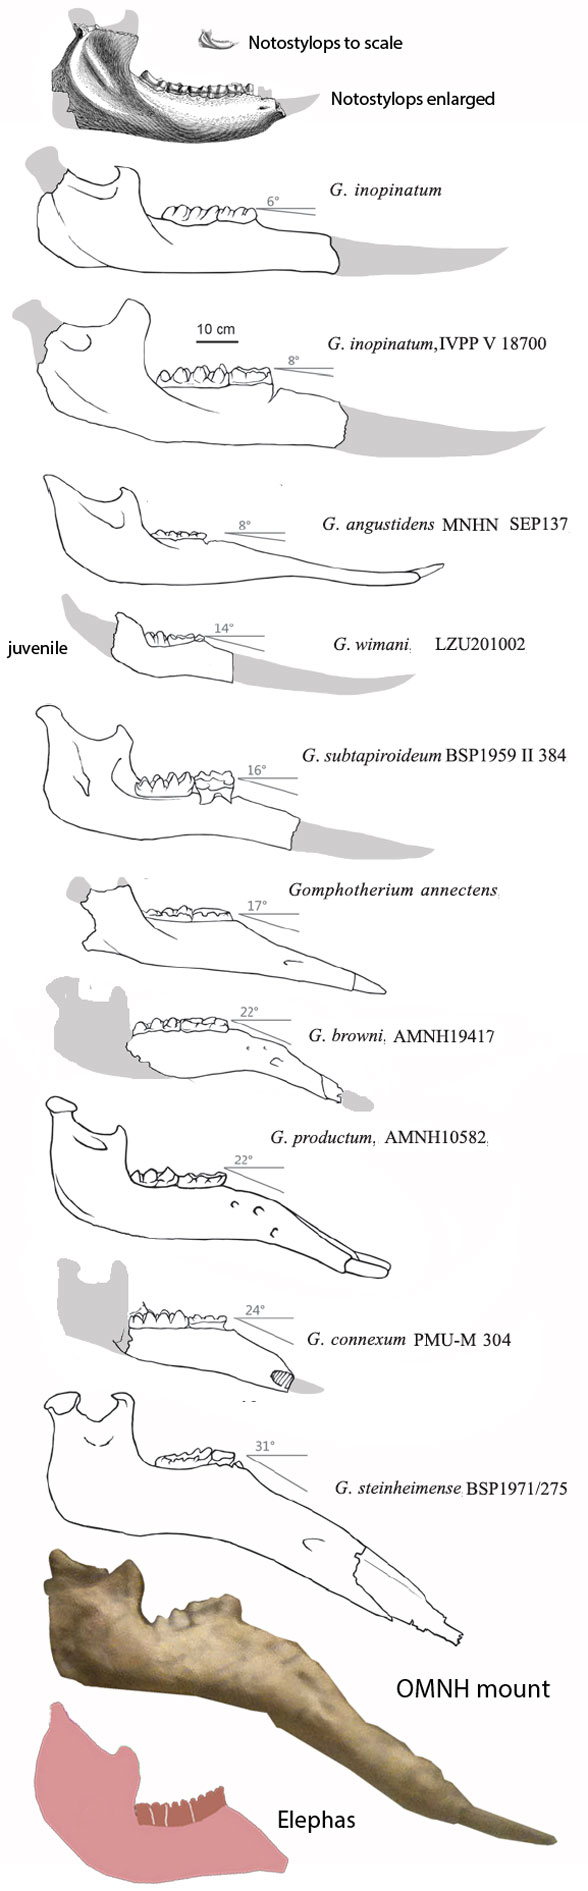 Gomphotherium jaws